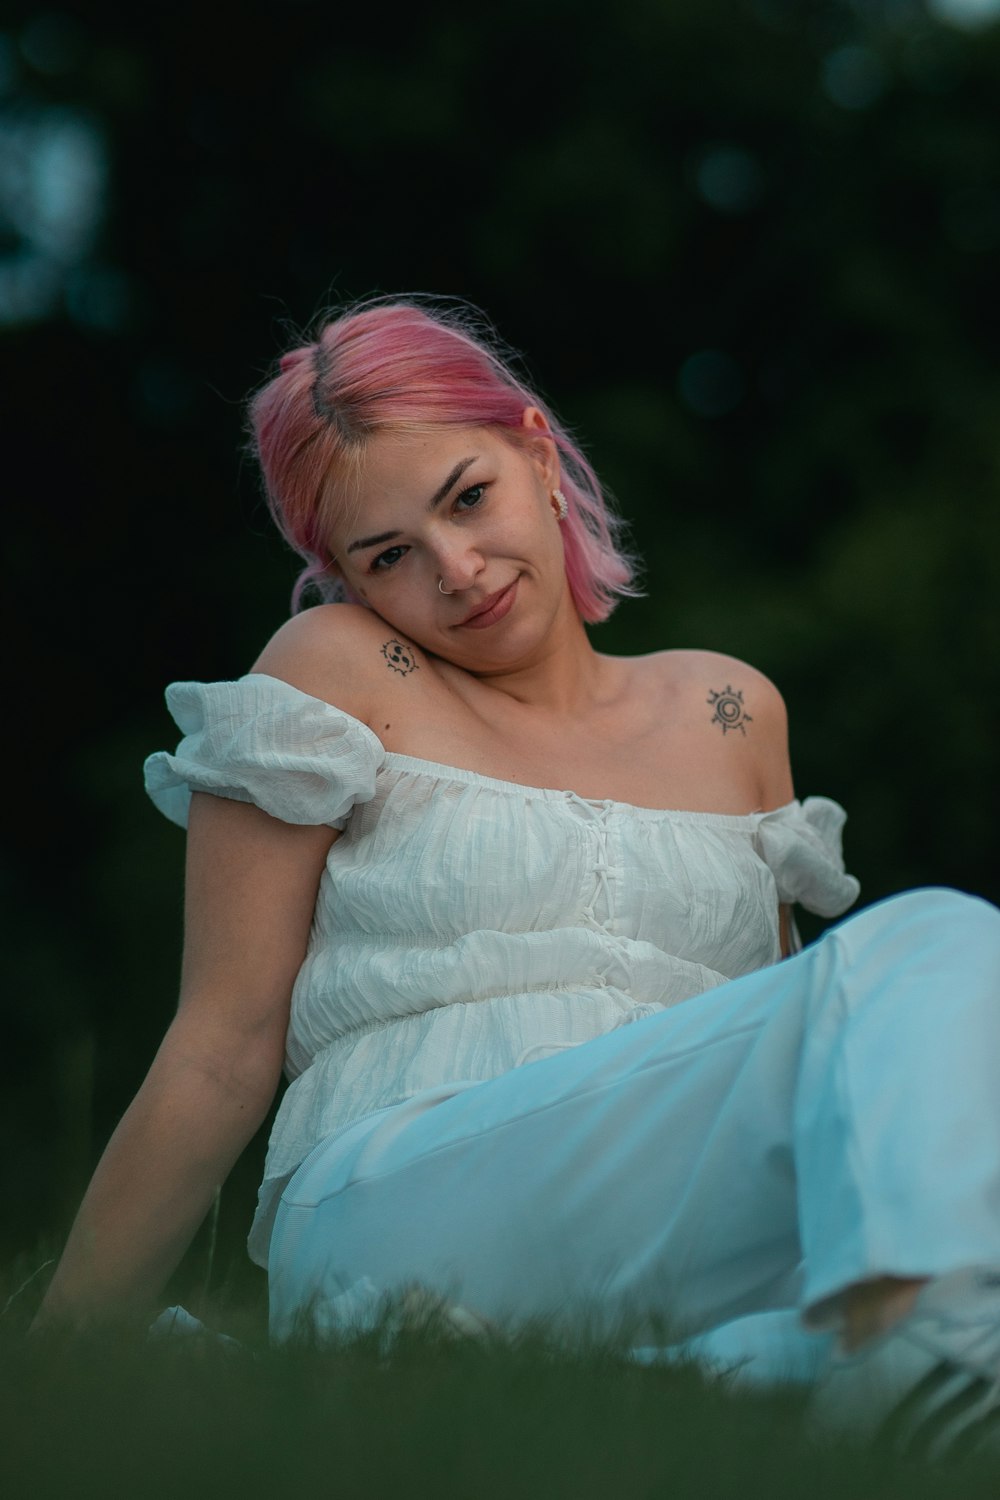 a woman with pink hair sitting in the grass